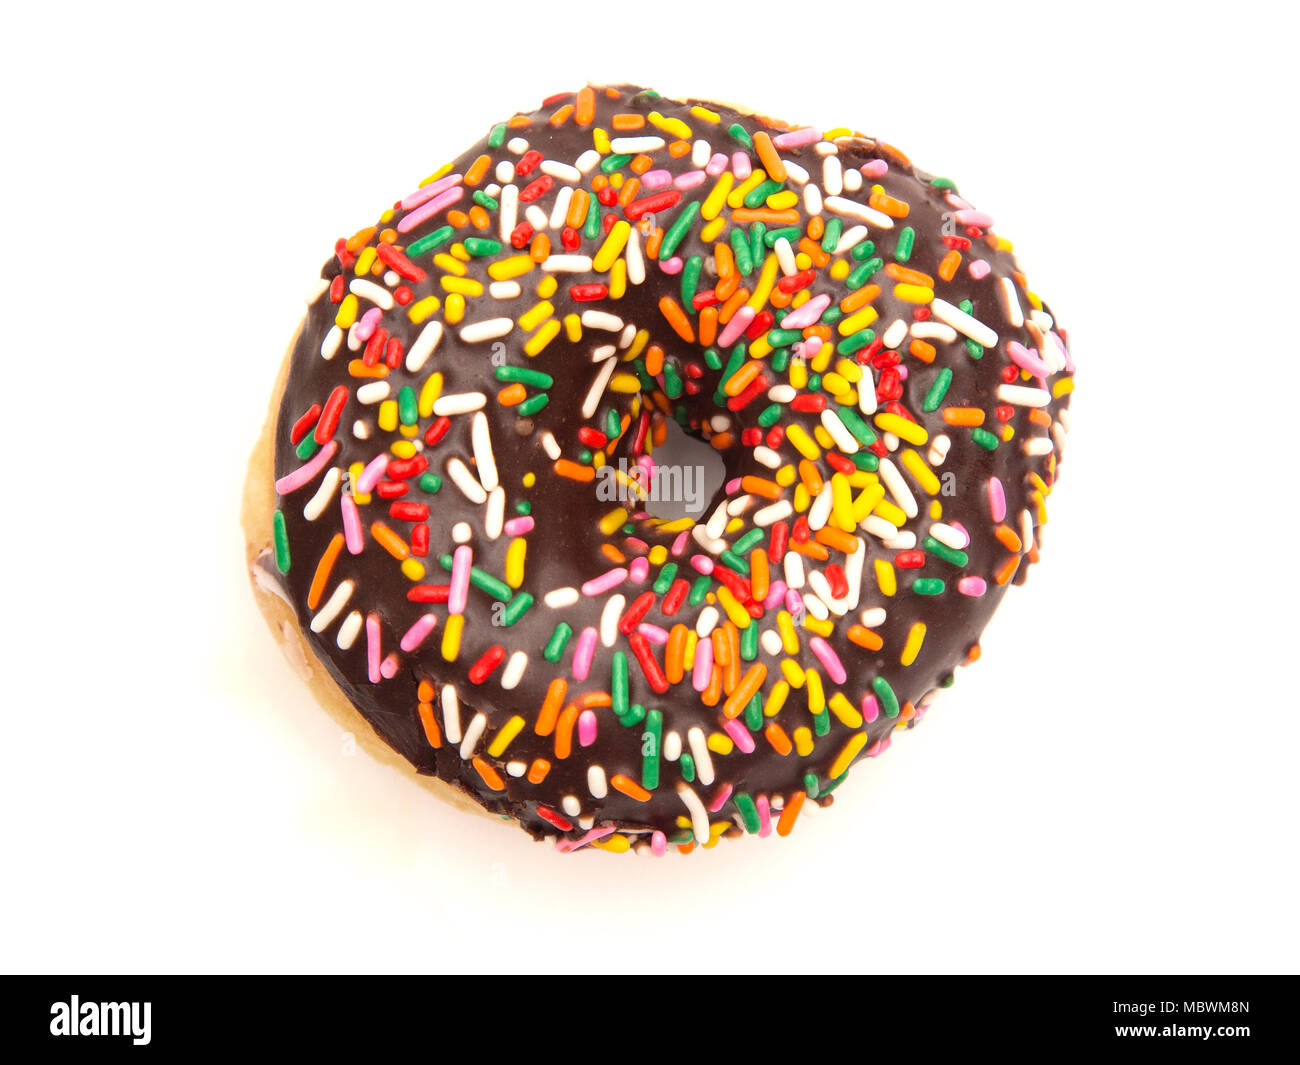 Chocolate Sprinkle Donuts on a White Background Stock Photo